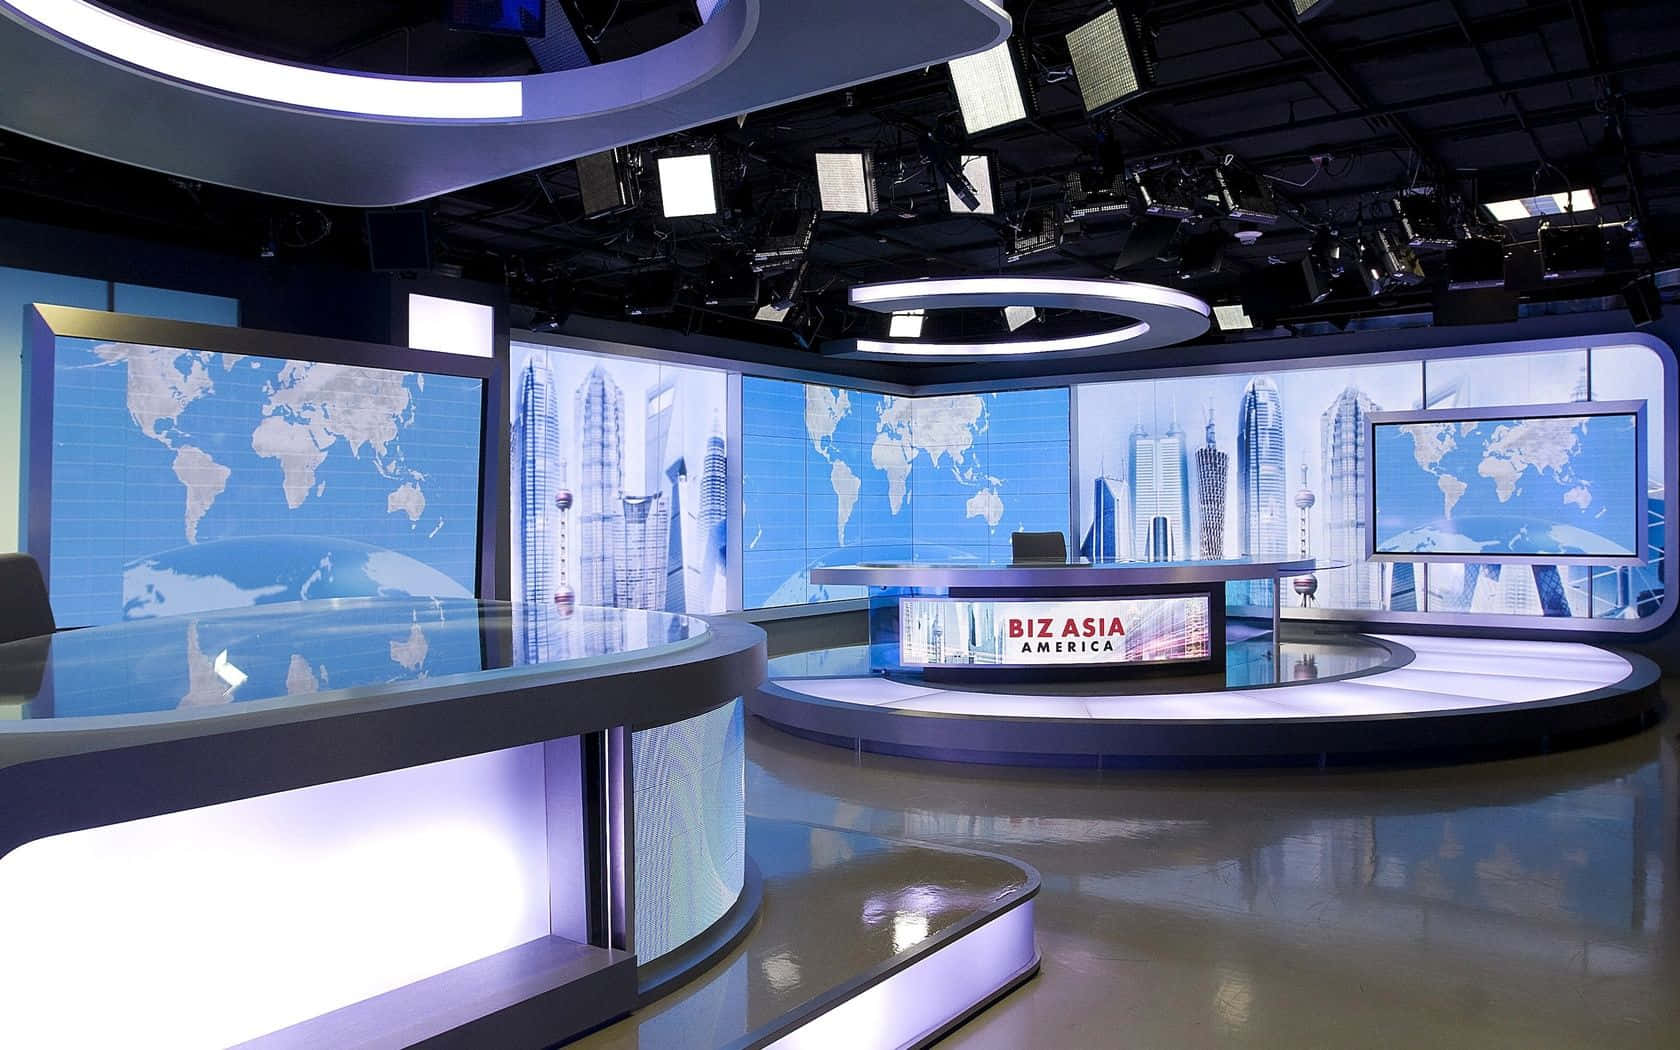 A News Studio With A Large Screen And Lights